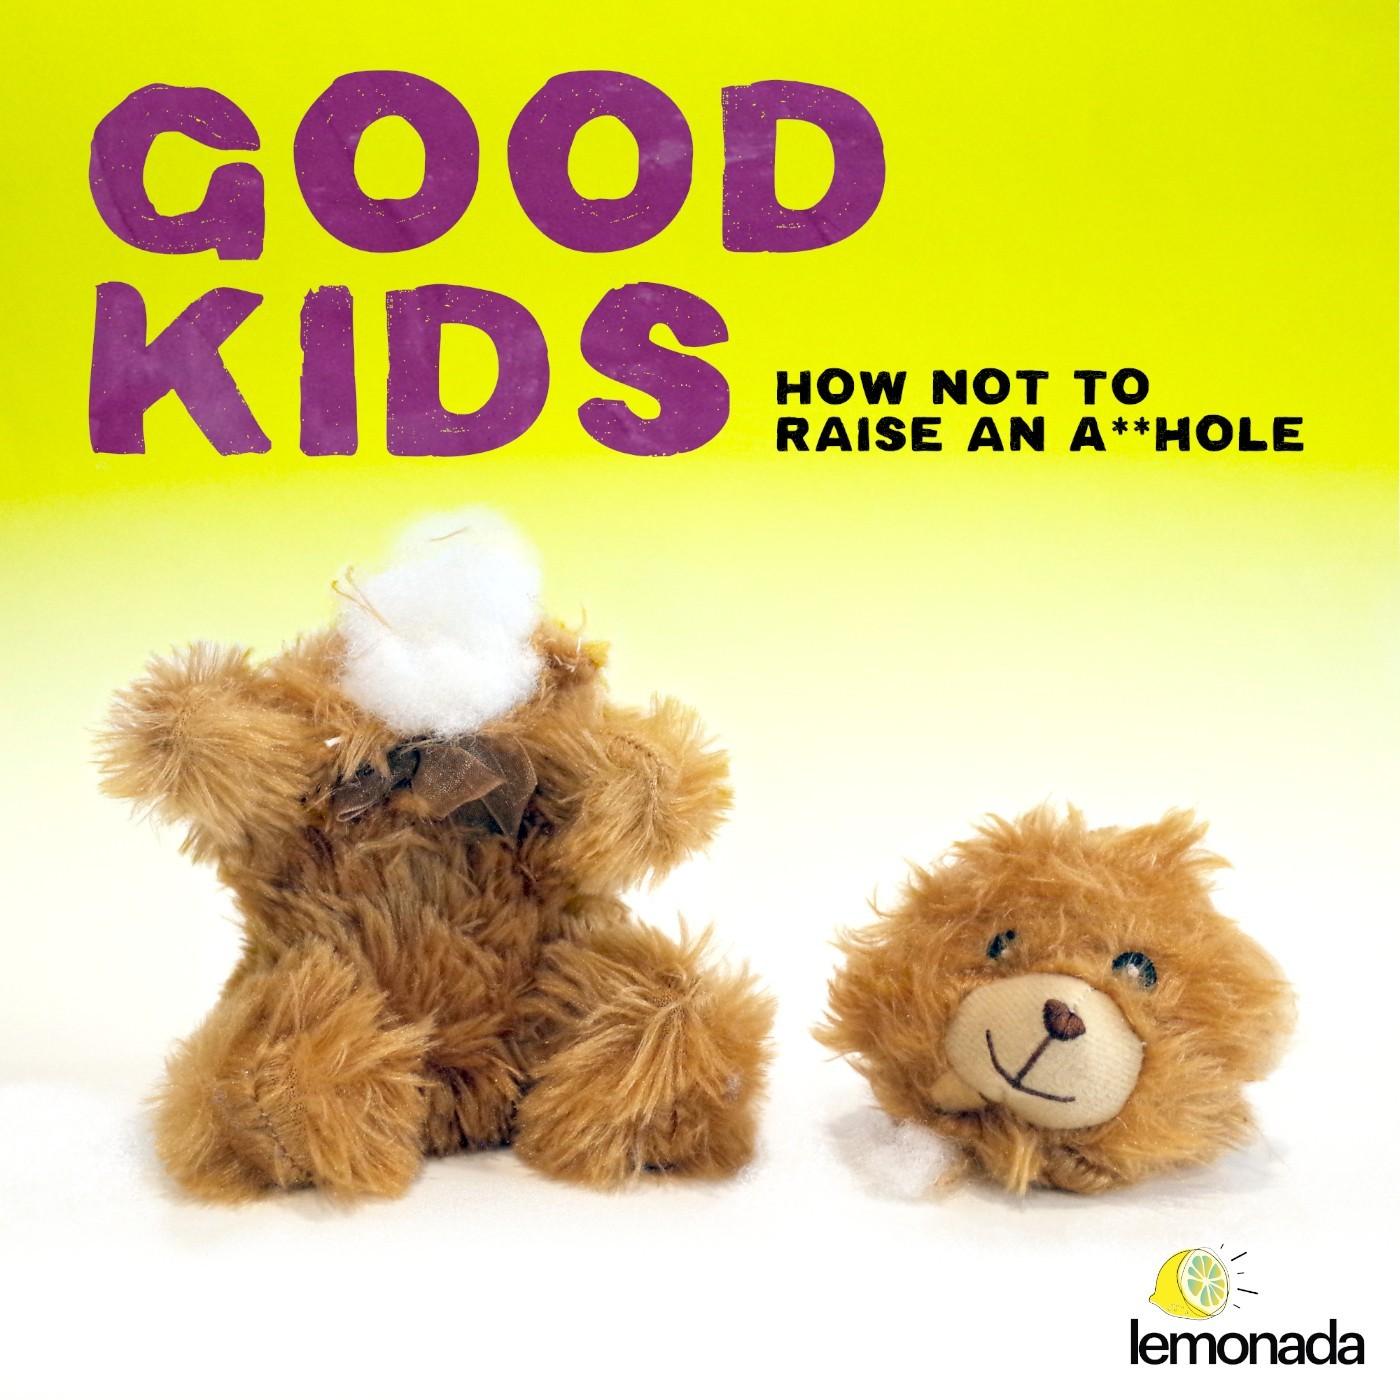 GOOD KIDS: HOW NOT TO RAISE AN A**HOLE IS THE #1 KIDS & FAMILY / PARENTING PODCAST IN THE COUNTRY